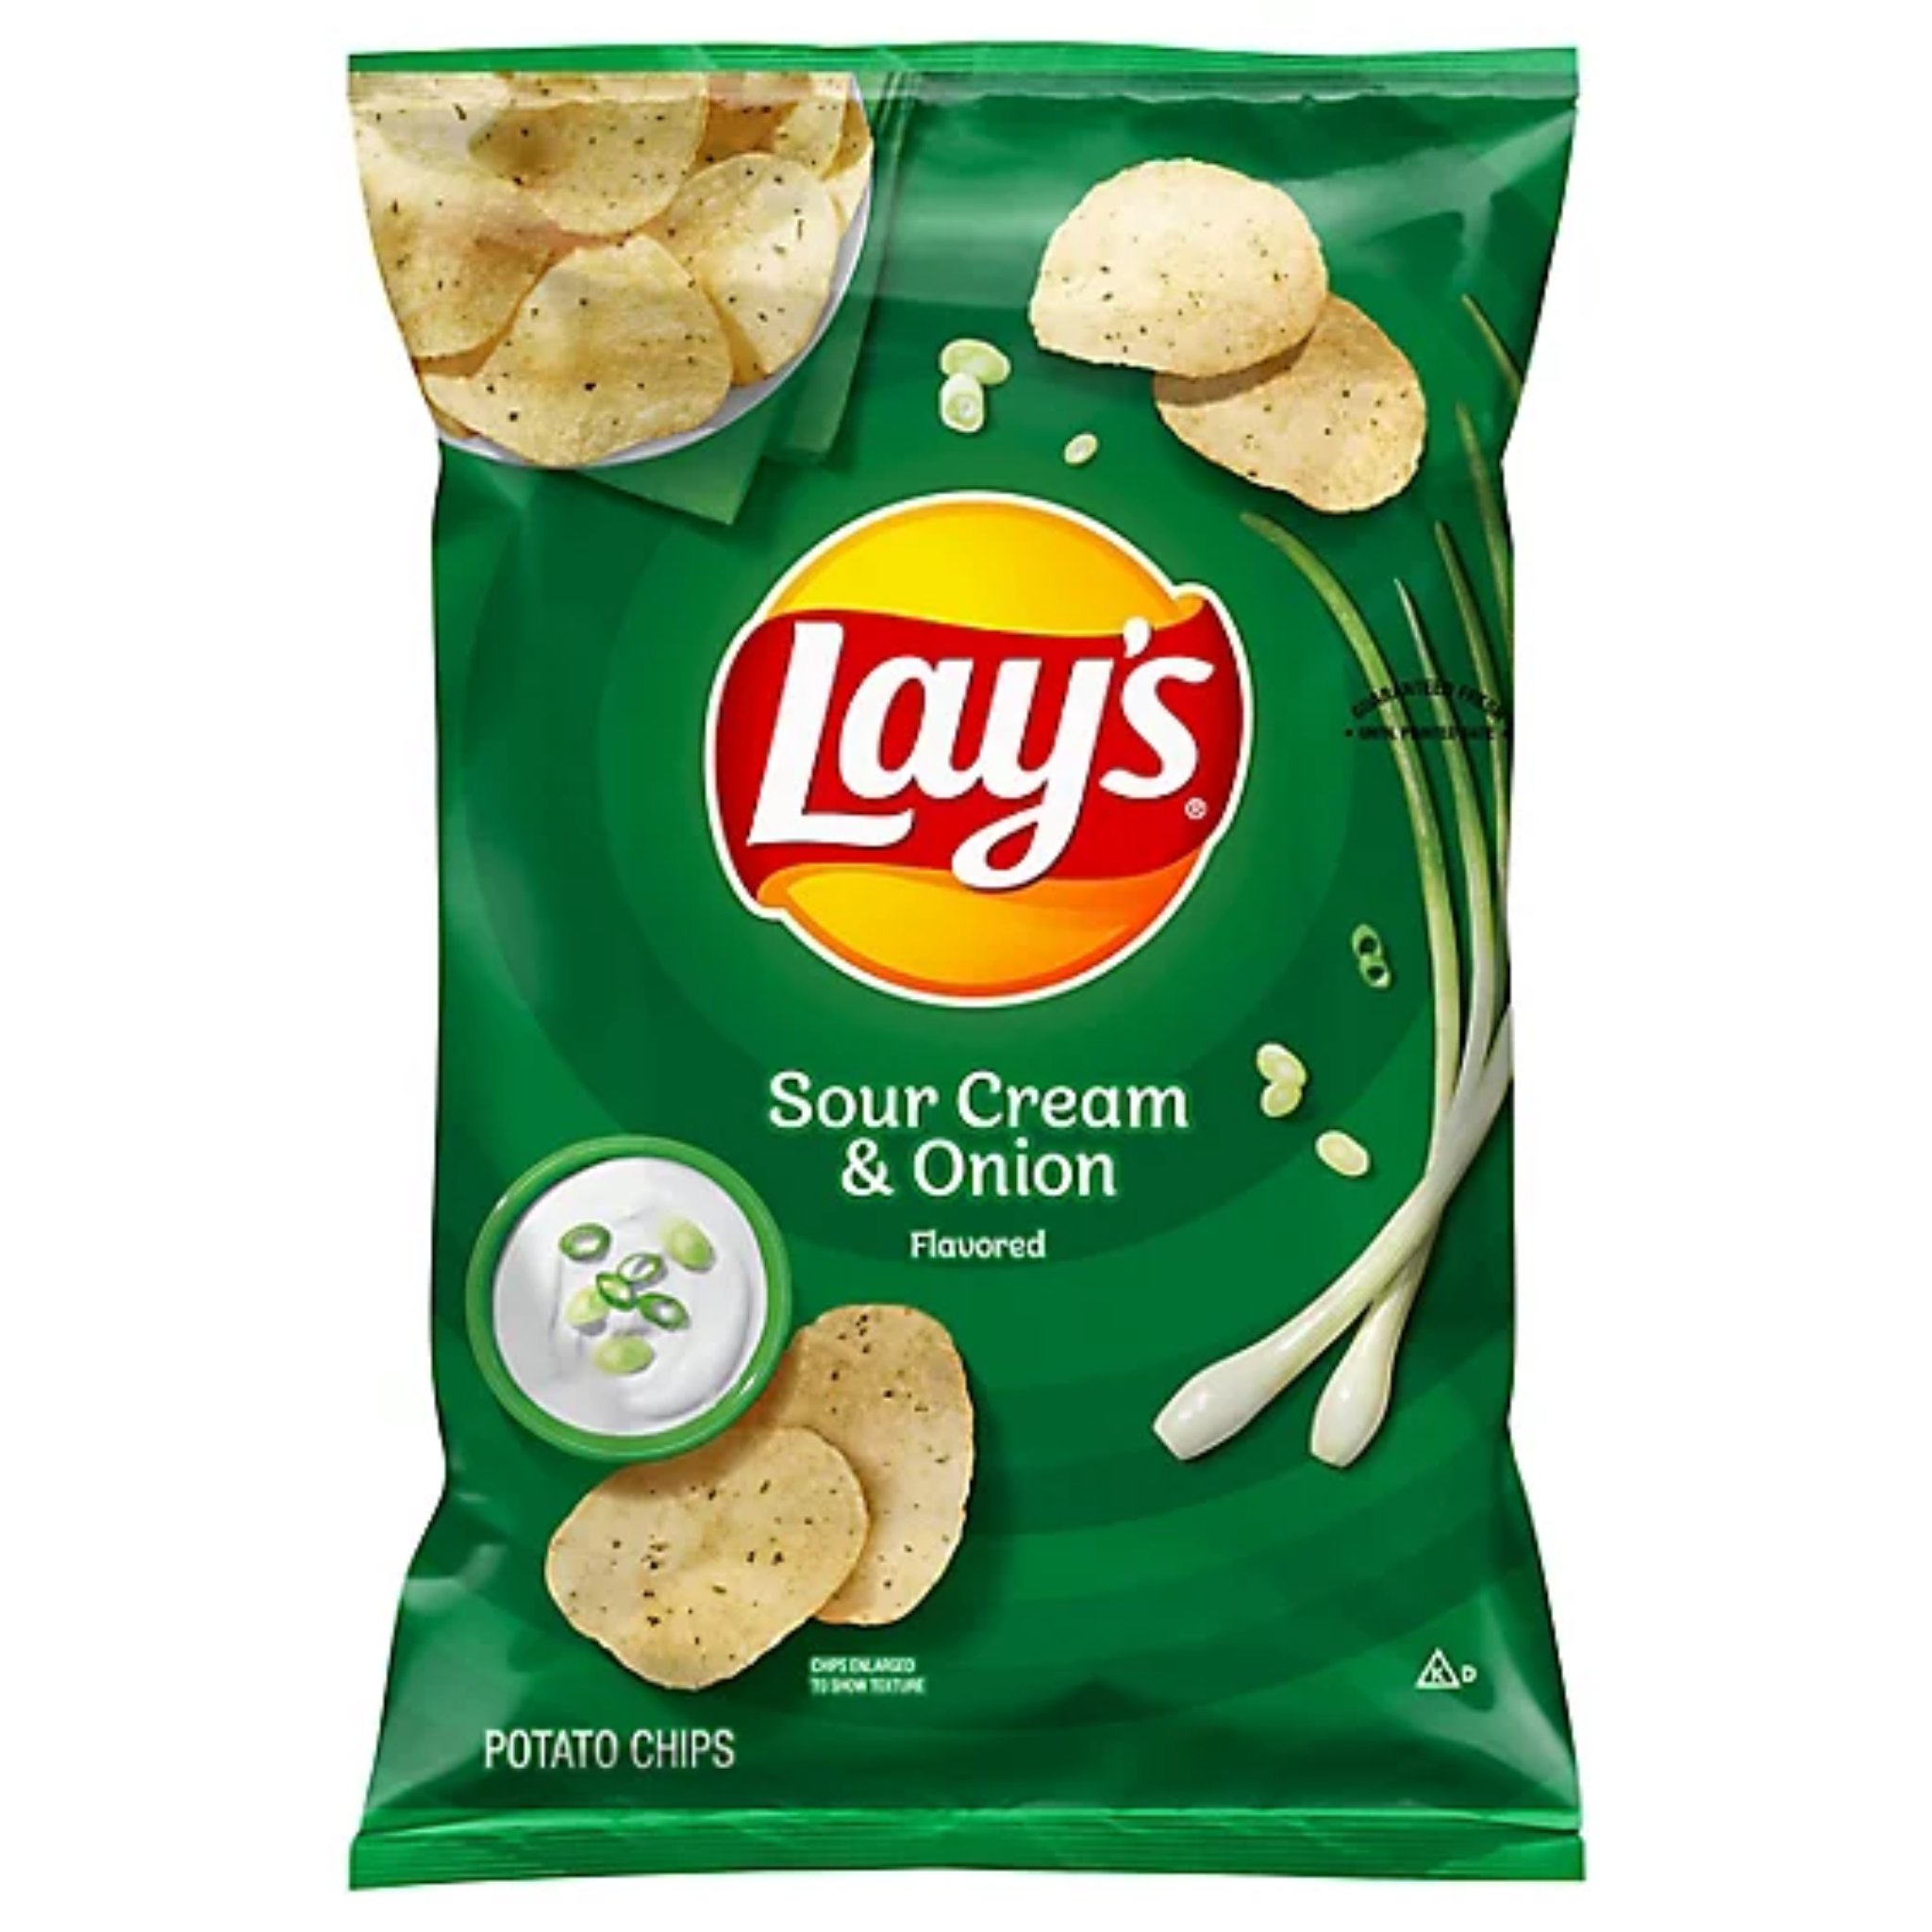 Lays Sour Cream and Onion 7.5oz